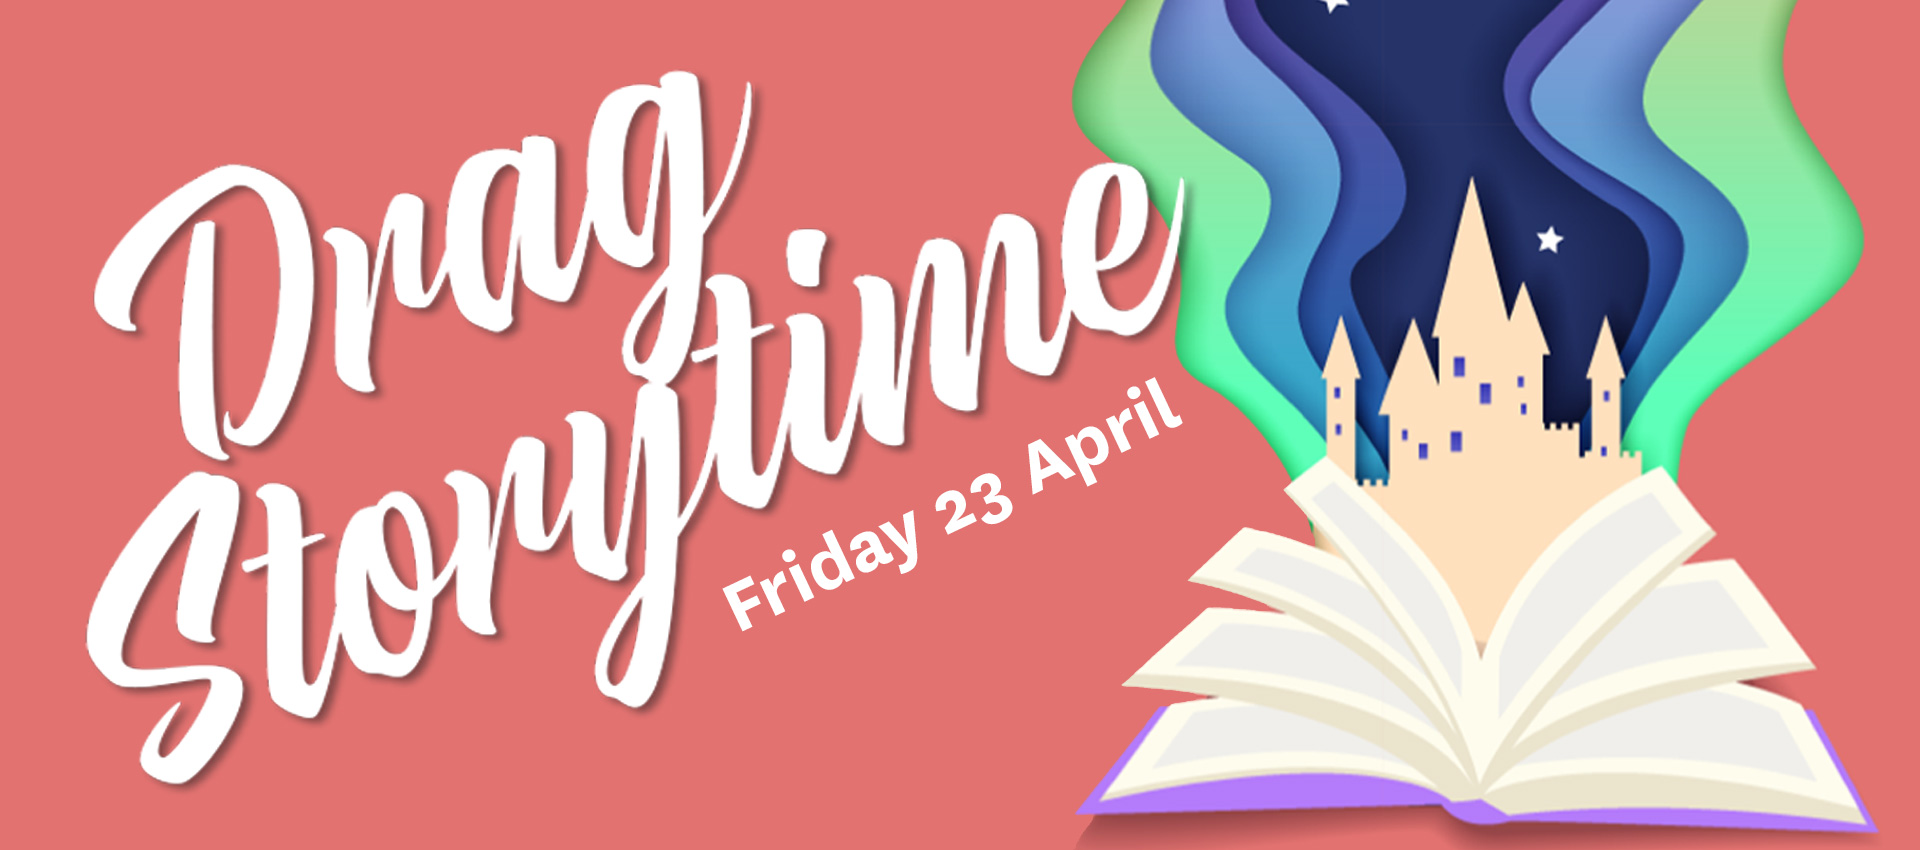 Event title: Drag Storytime; an open book contains a castle and rising blue and green energy